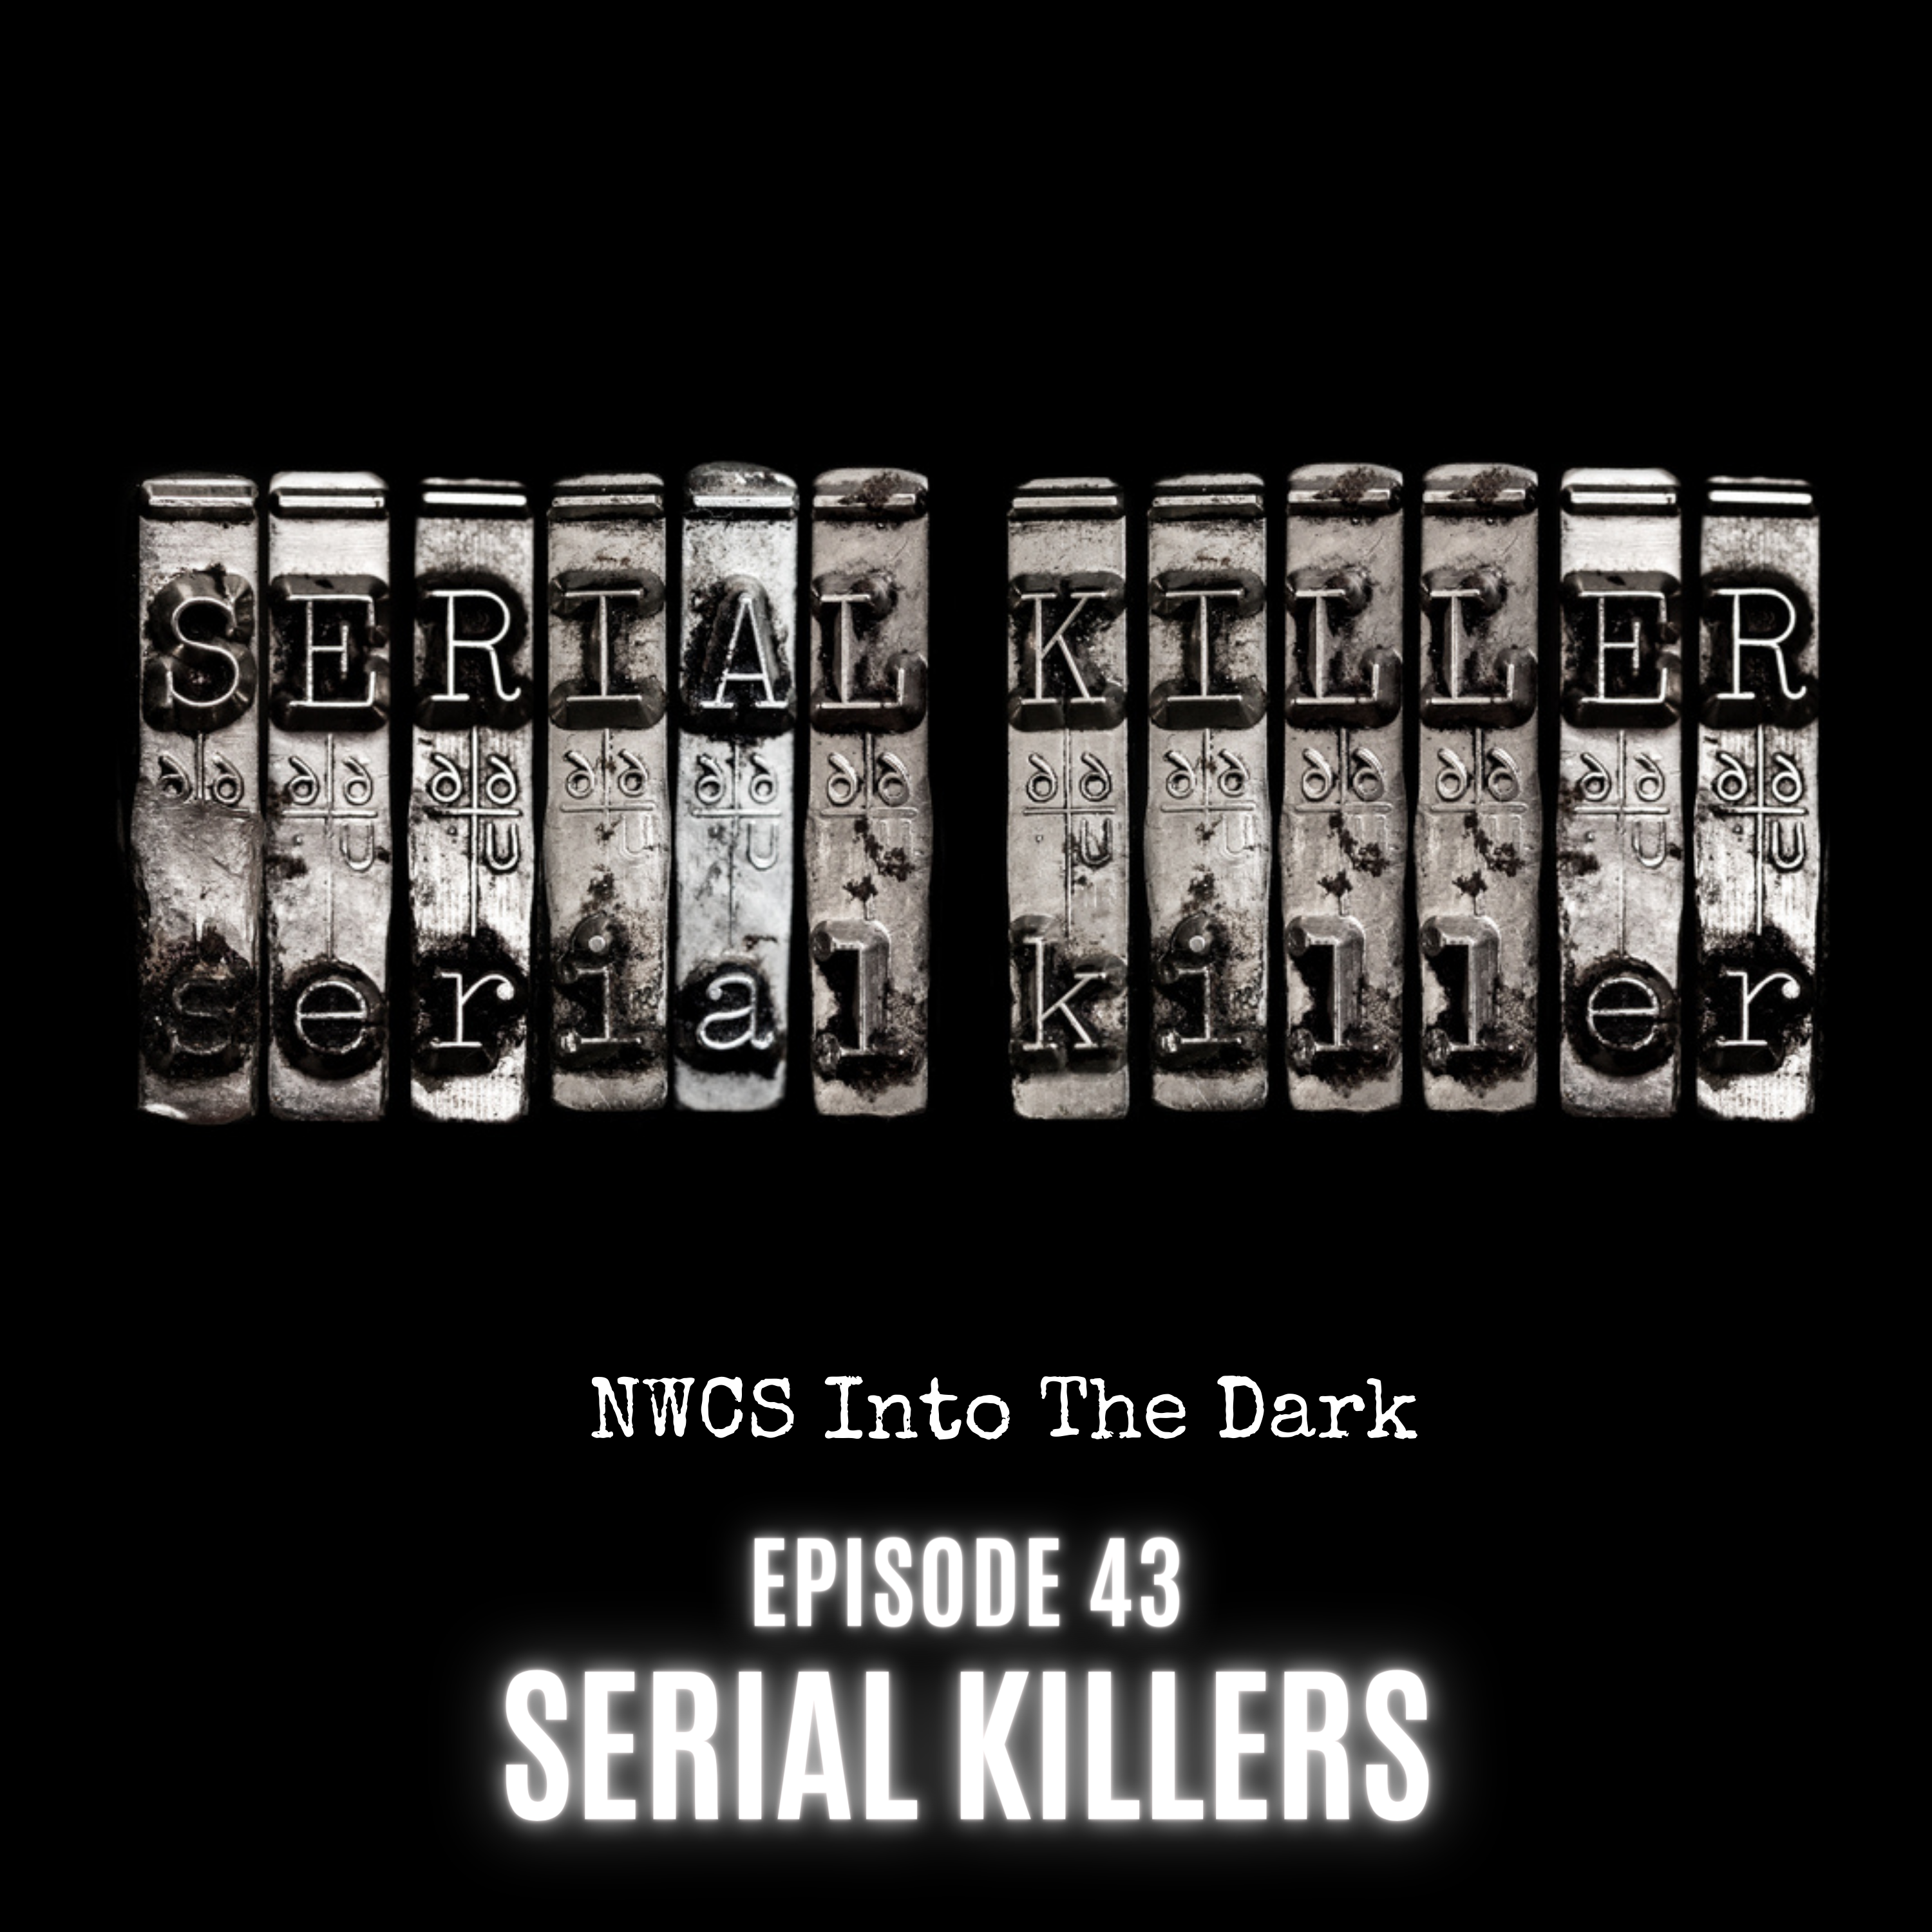 NWCS Into The Dark Episode 43 Serial Killers